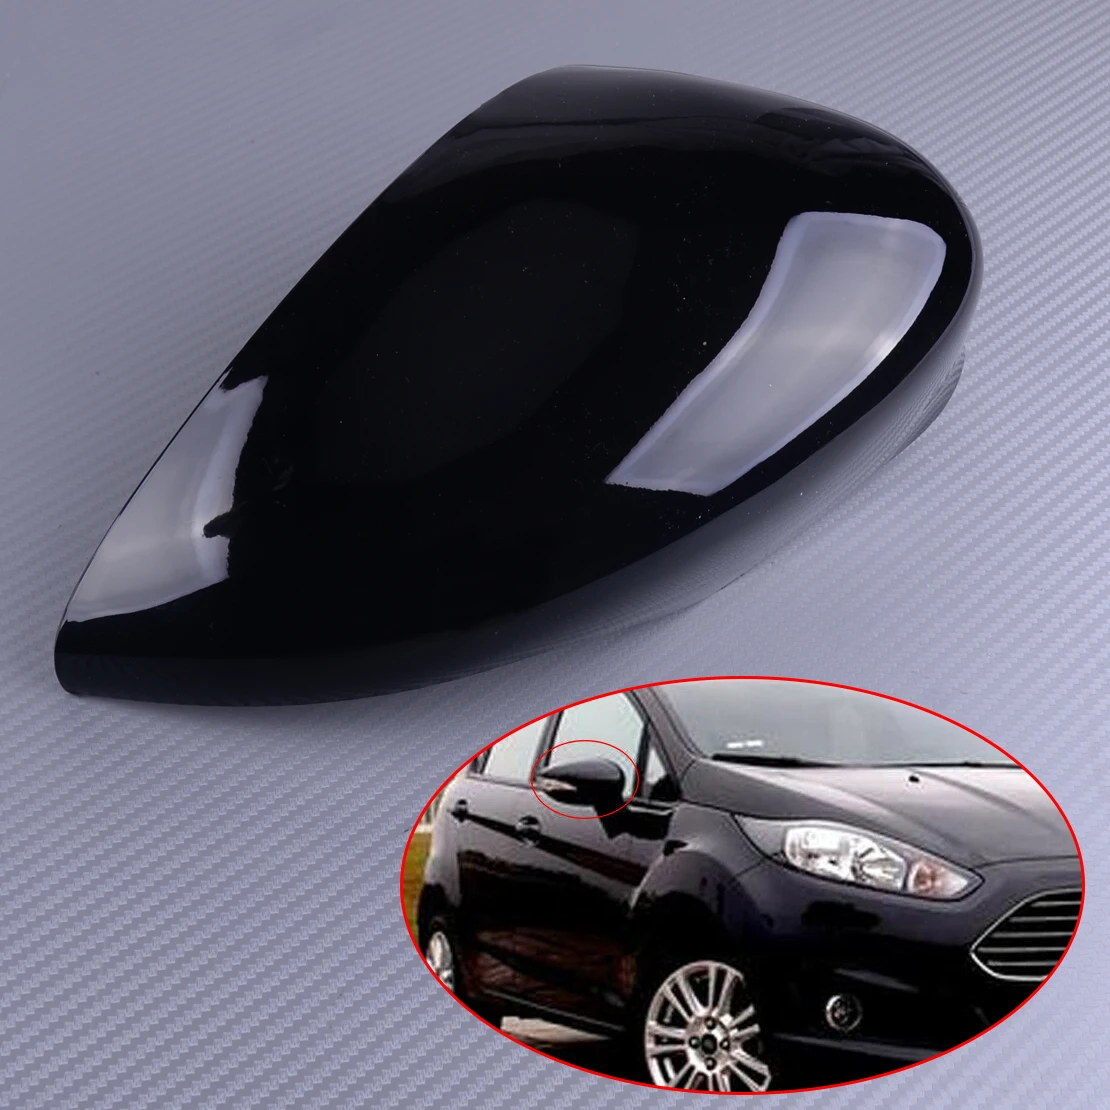 DWCX Right Gloss Black Wing Mirror Cover Cap Painted Fit for Ford Fiesta MK7 2008 2009 2010 2011 2012 2013 2014 2015 2016 2017